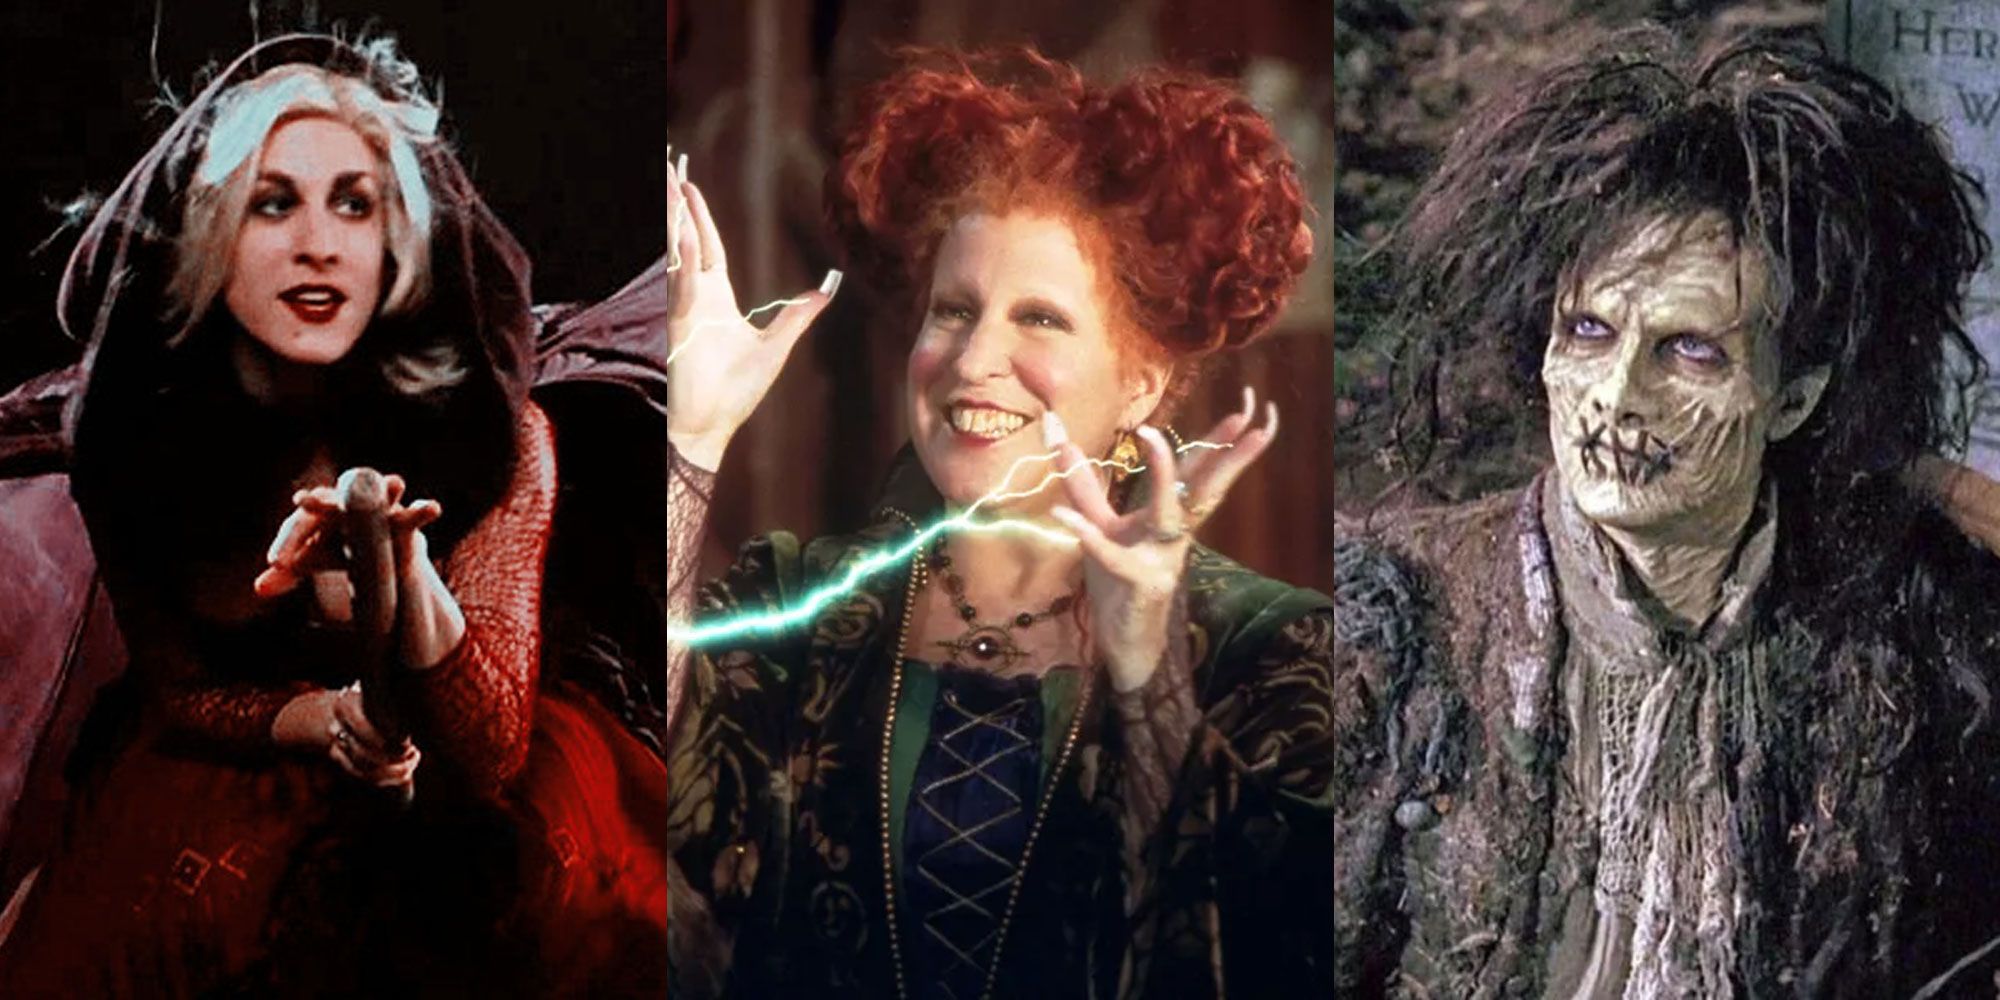 A split image features Sarah Sanderson, Winifred Sanderson, and Billy Butcherson in Hocus Pocus